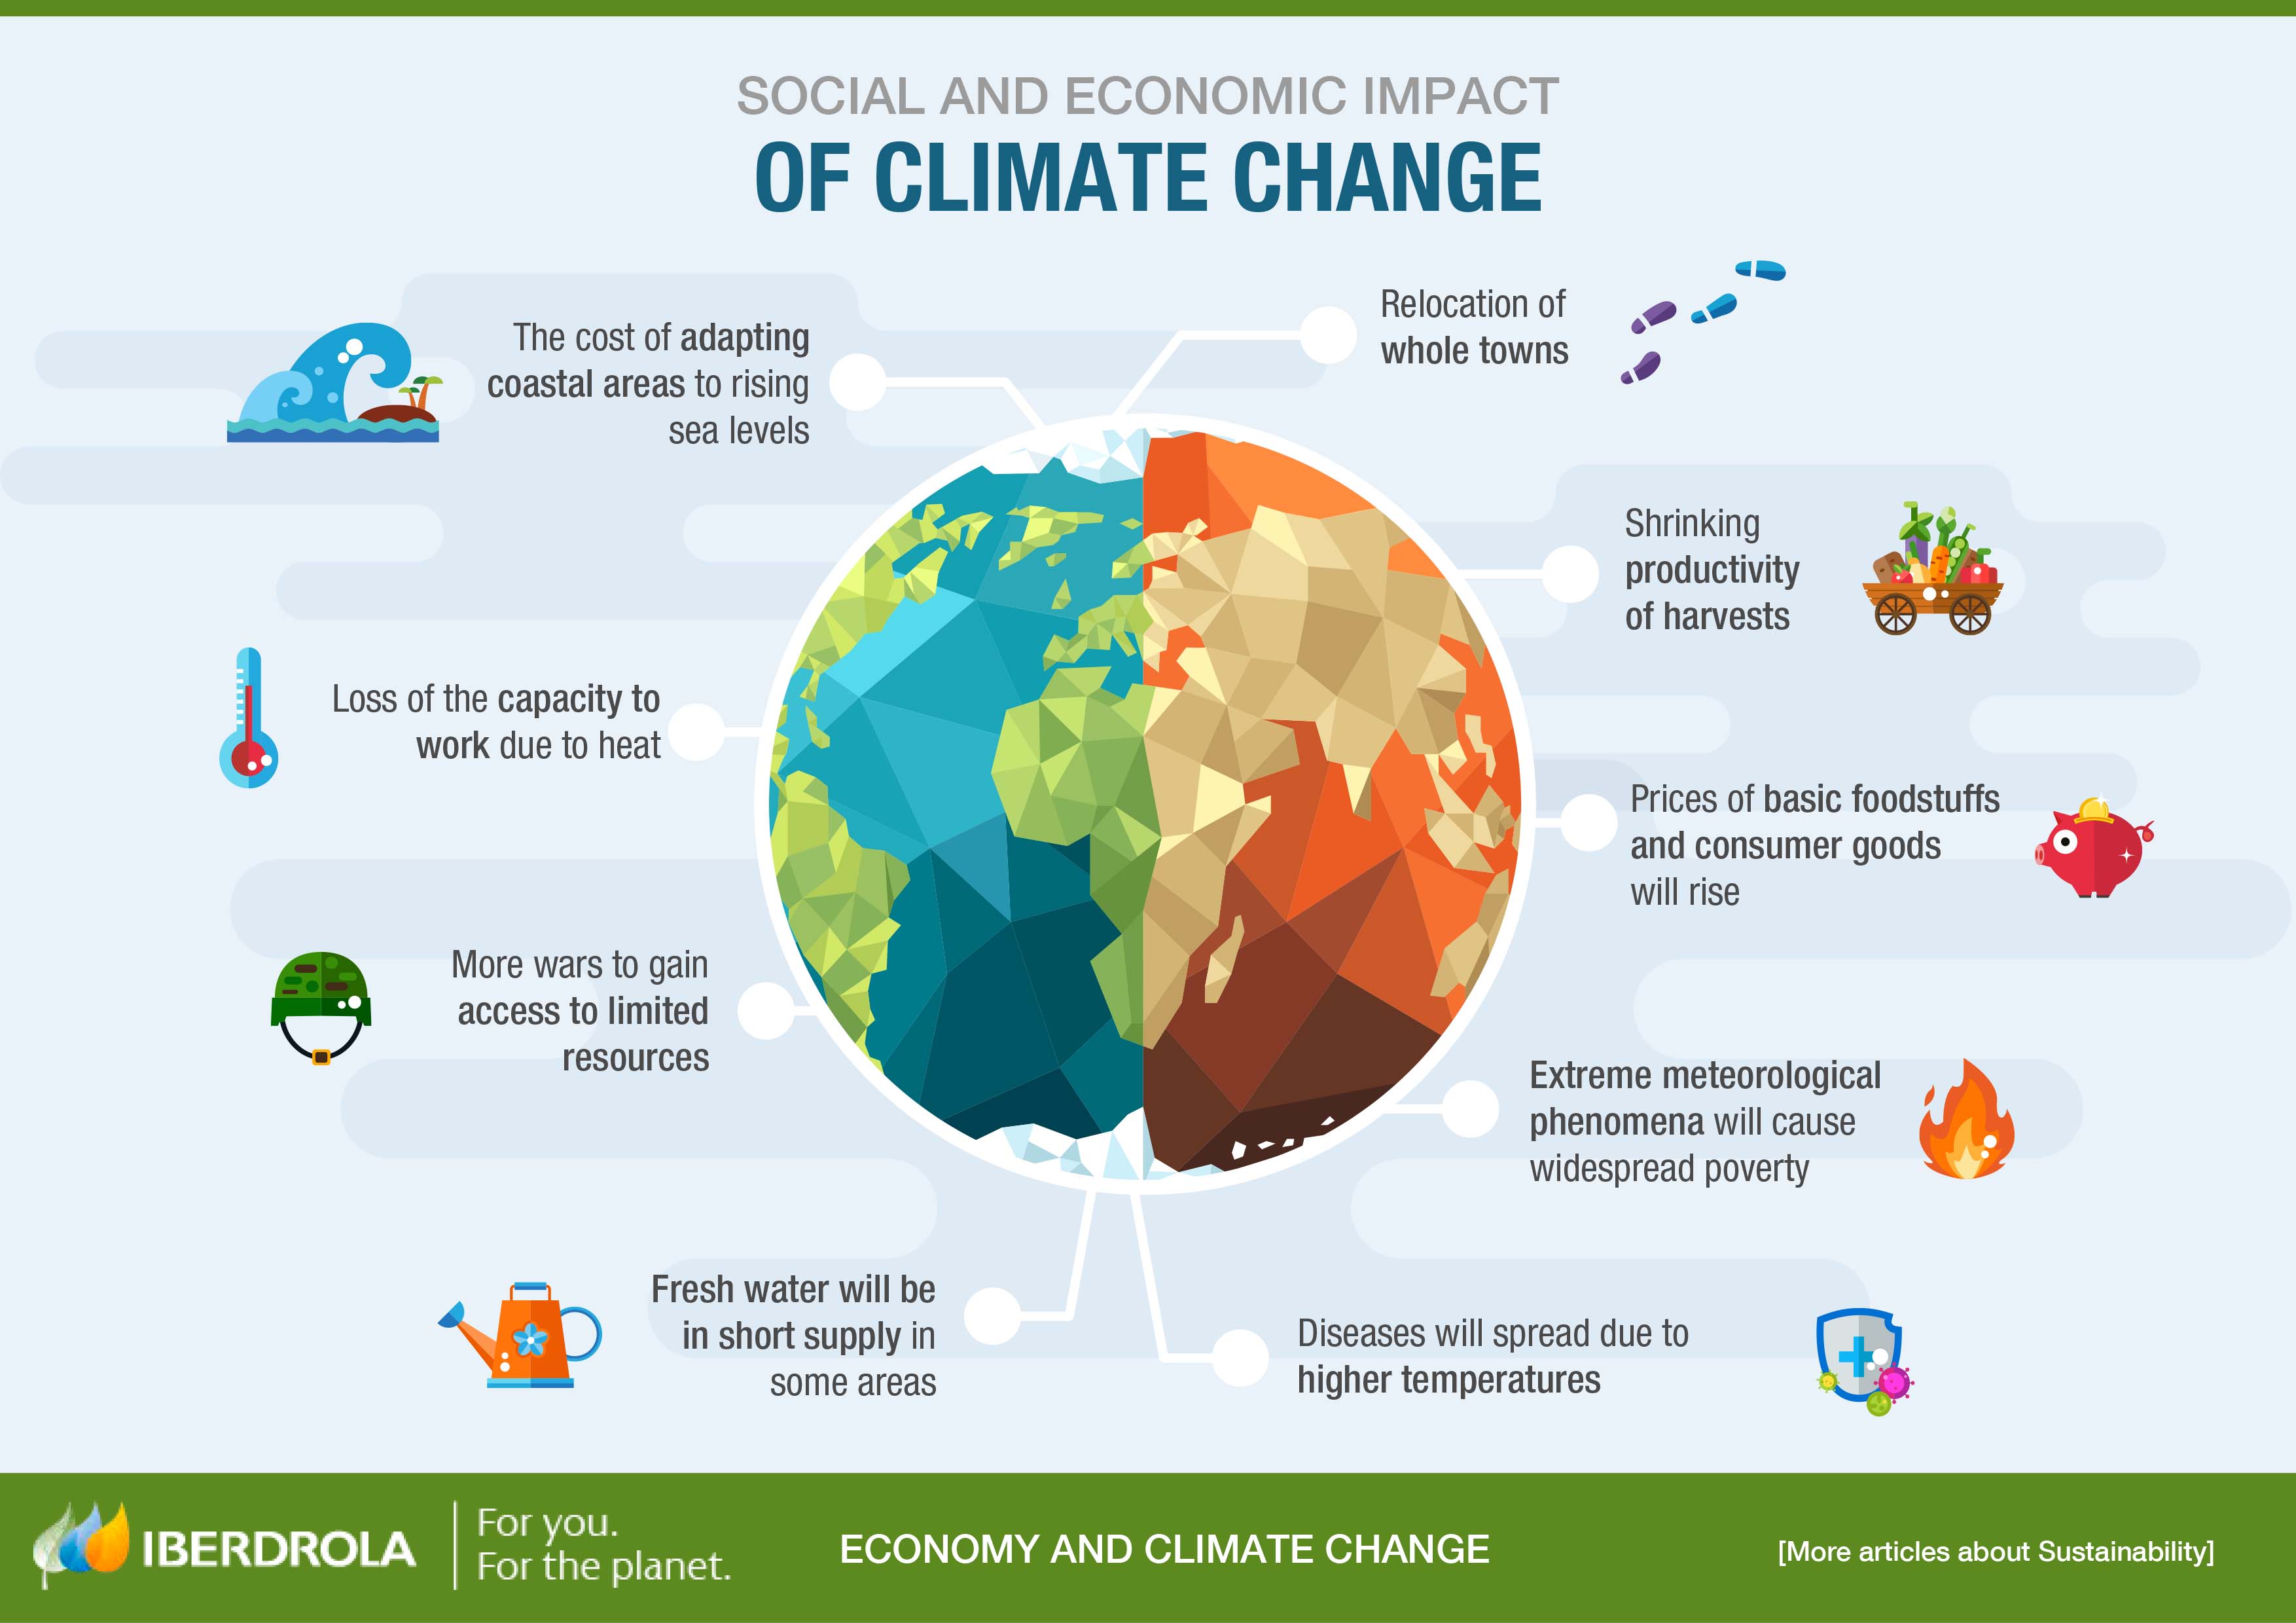 Impacts of Climate Change on the Economy and Society - Iberdrola